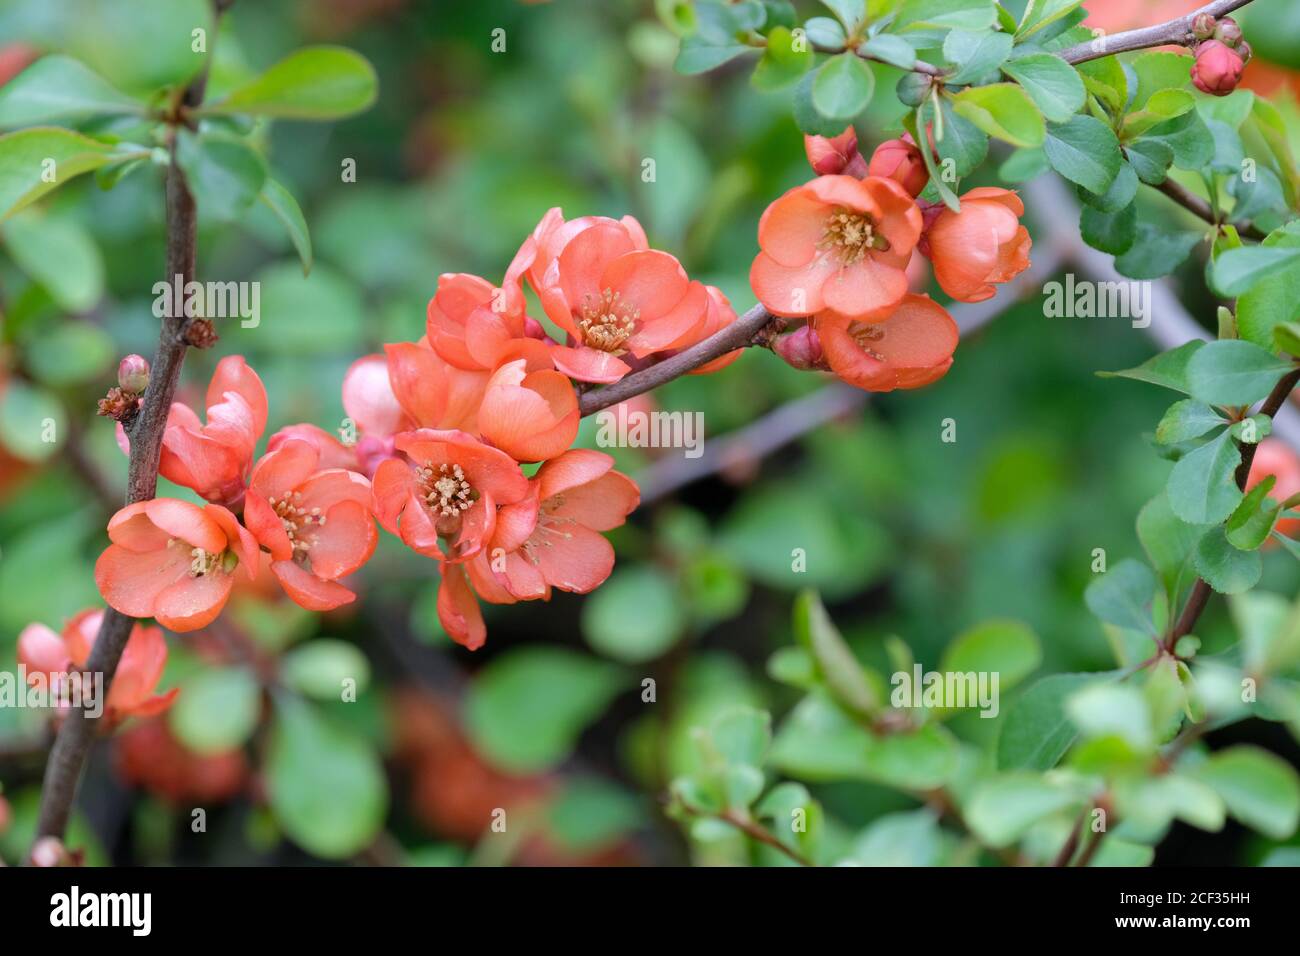 Coral pink flowers in early spring of Chaenomeles superba 'Coral sea'. Japanese quince 'Coral Sea' or Maule's quince 'Coral sea'. Stock Photo